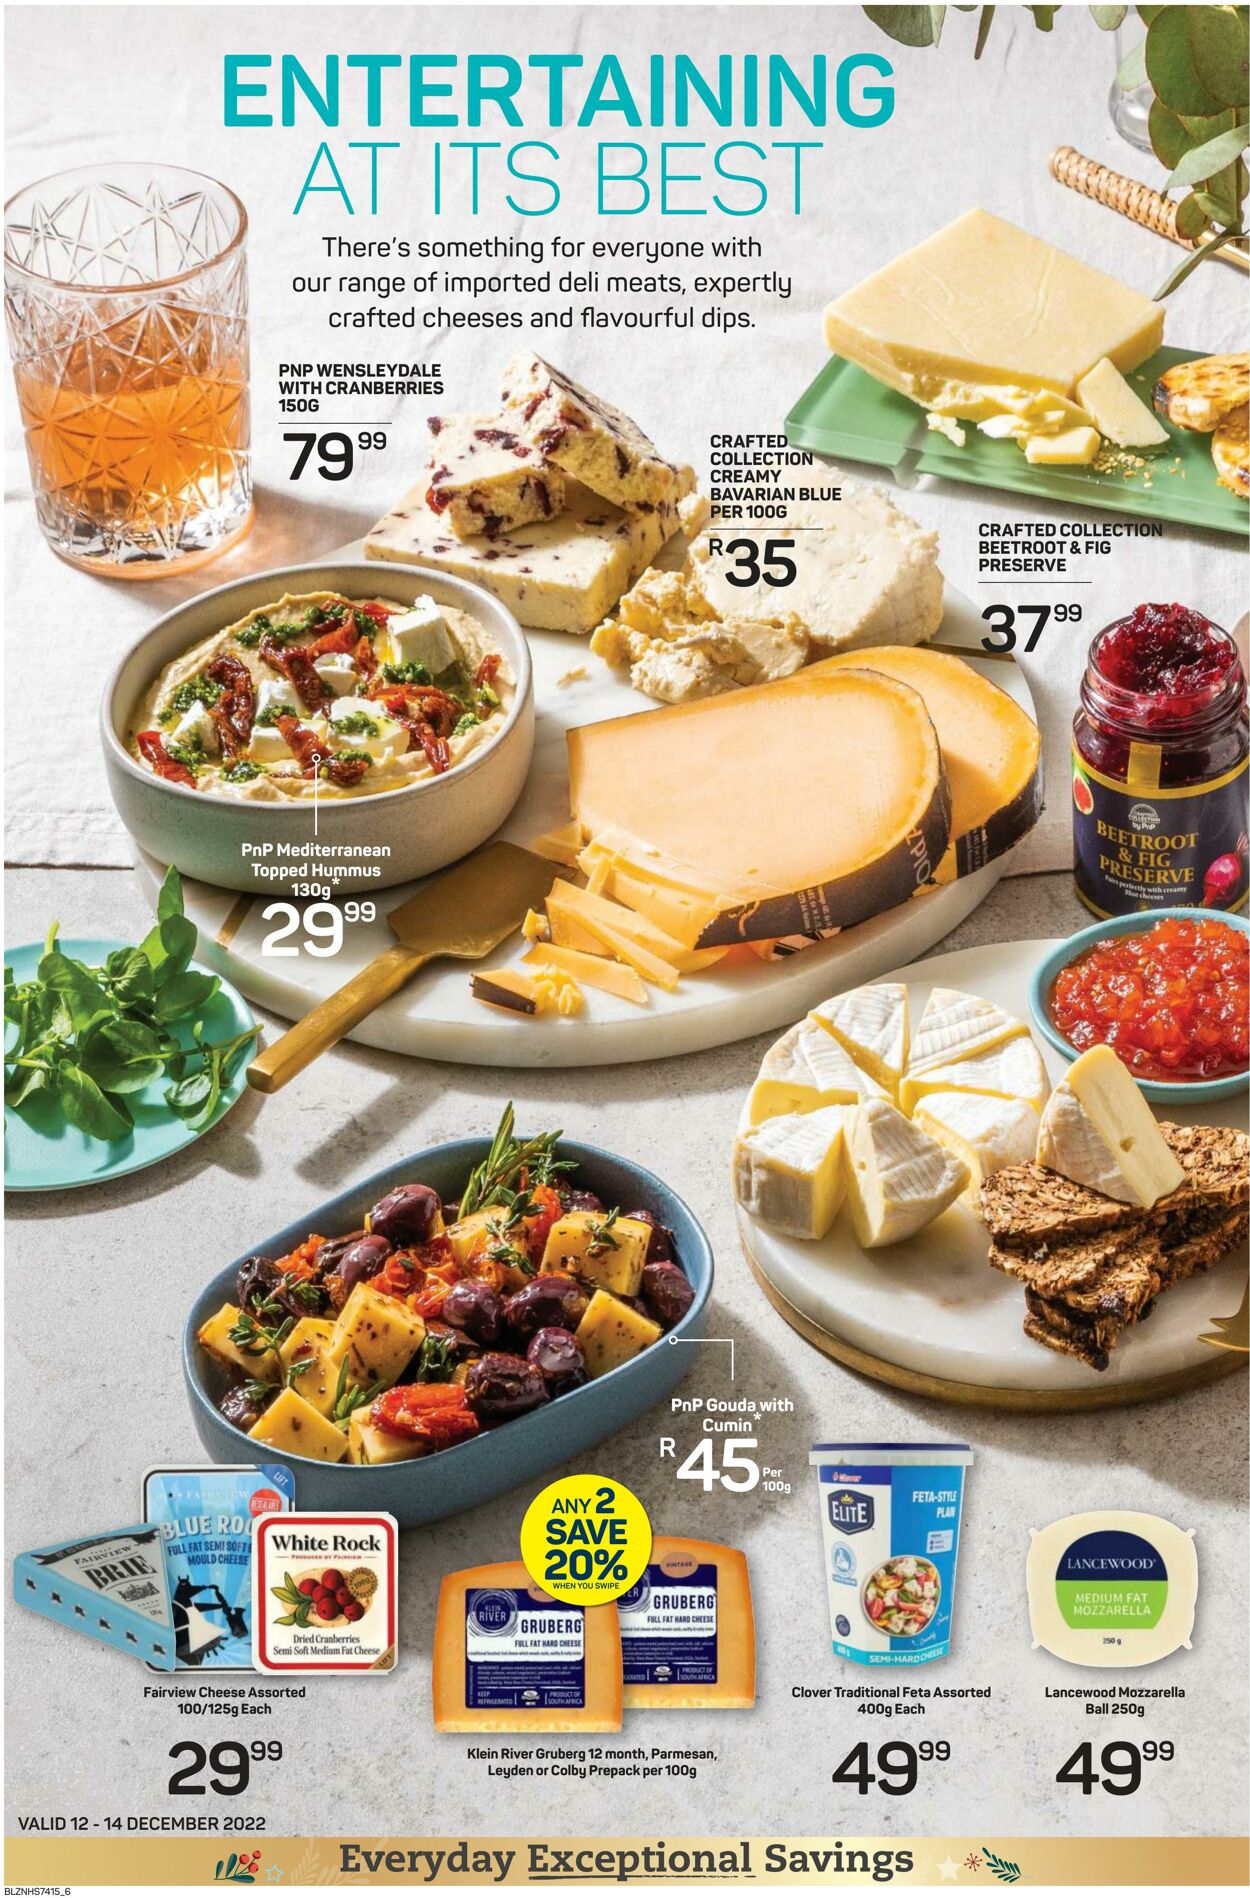 Special Pick n Pay 12.12.2022 - 14.12.2022